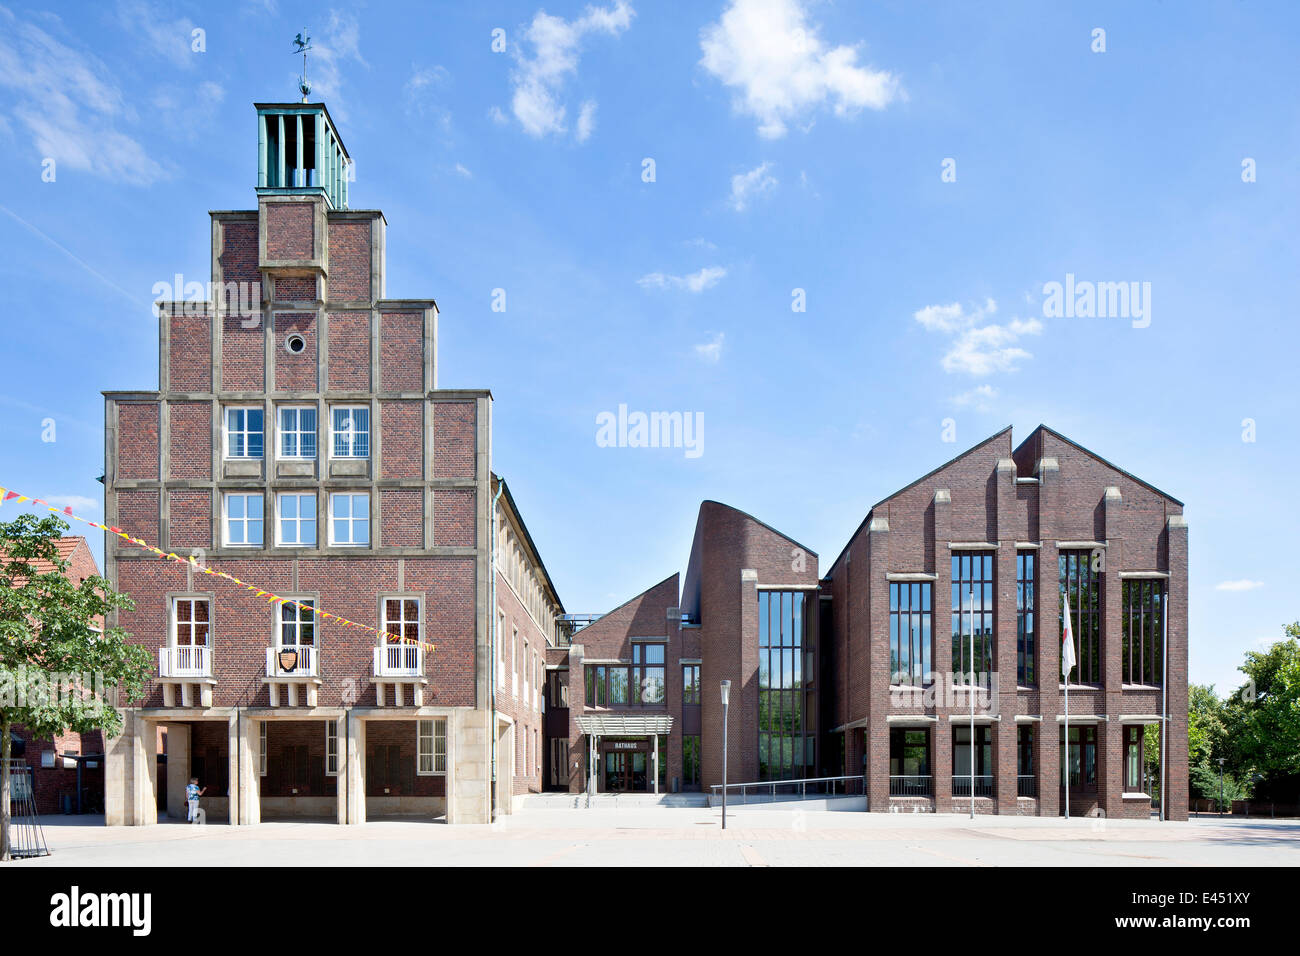 Old and new town hall, Ahaus, Münsterland, North Rhine-Westphalia, Germany Stock Photo